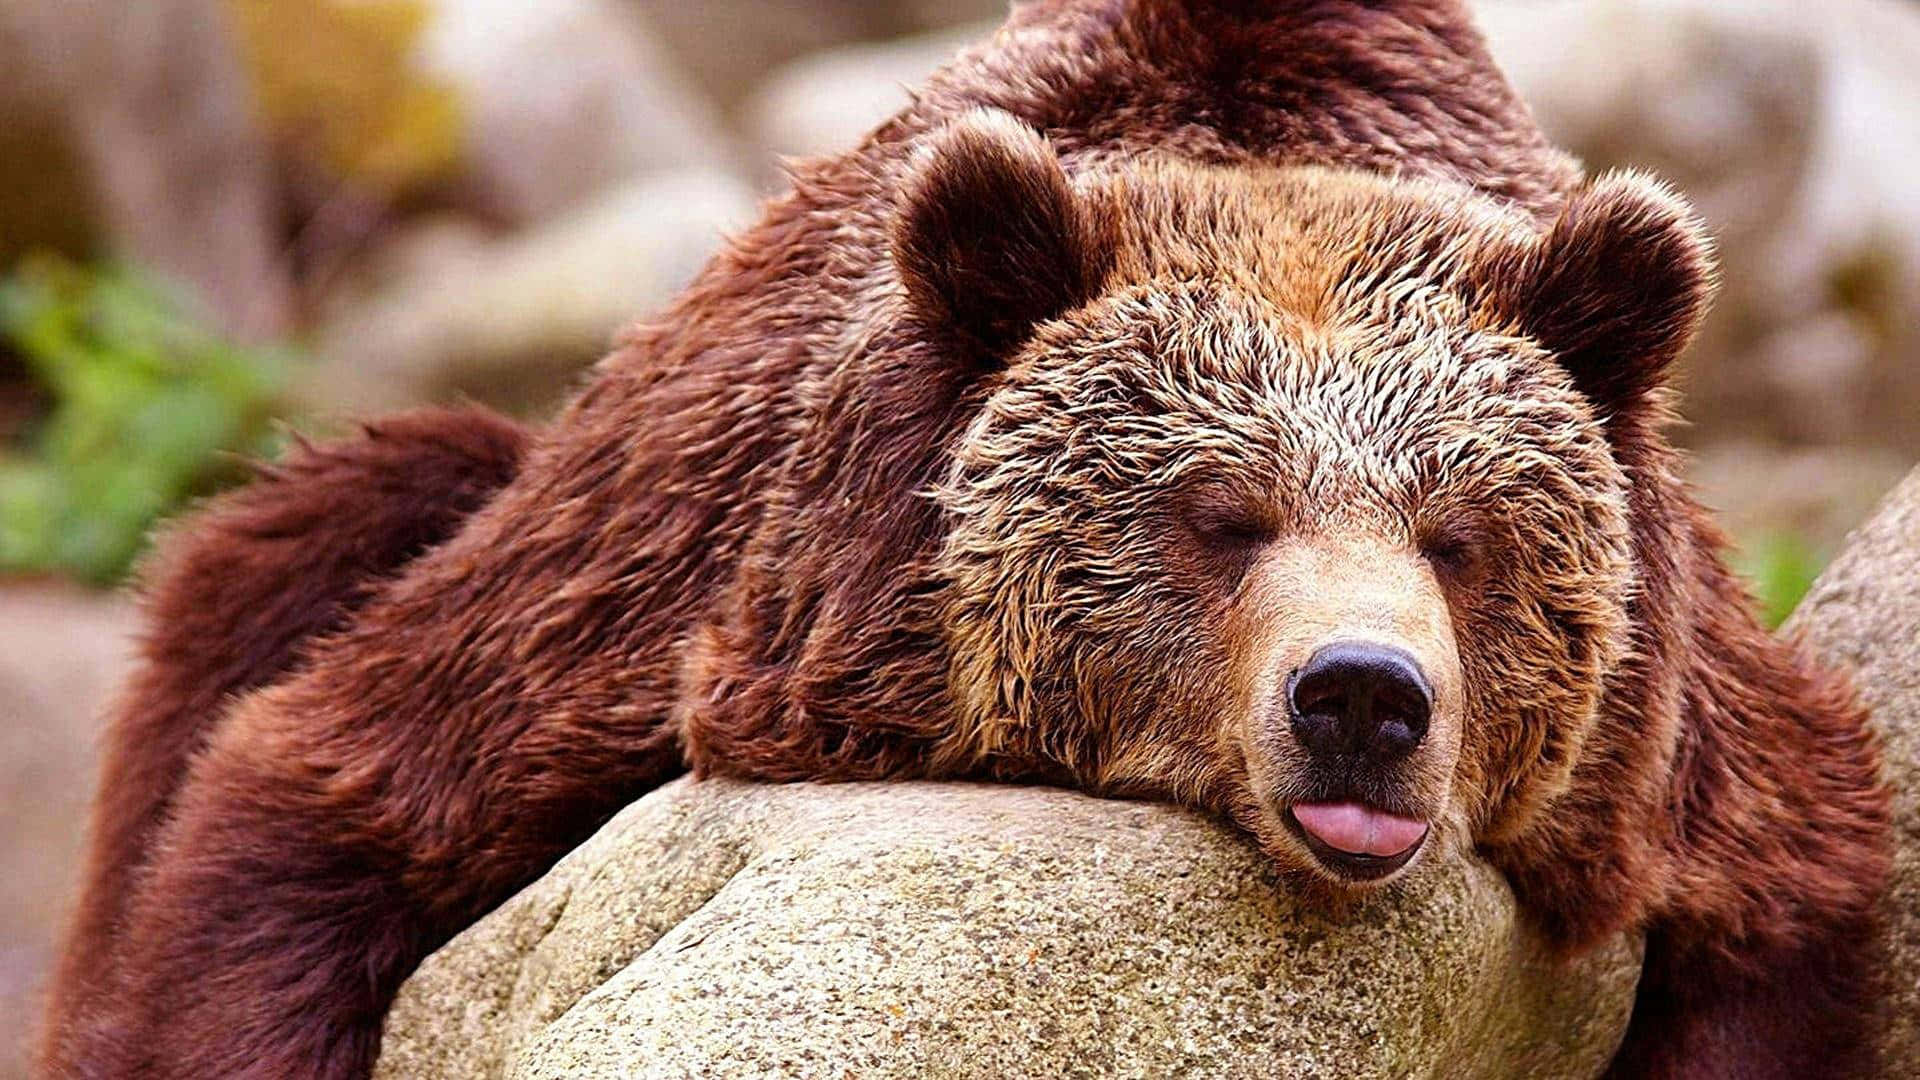 Resting Grizzly Bear Tongue Out Background